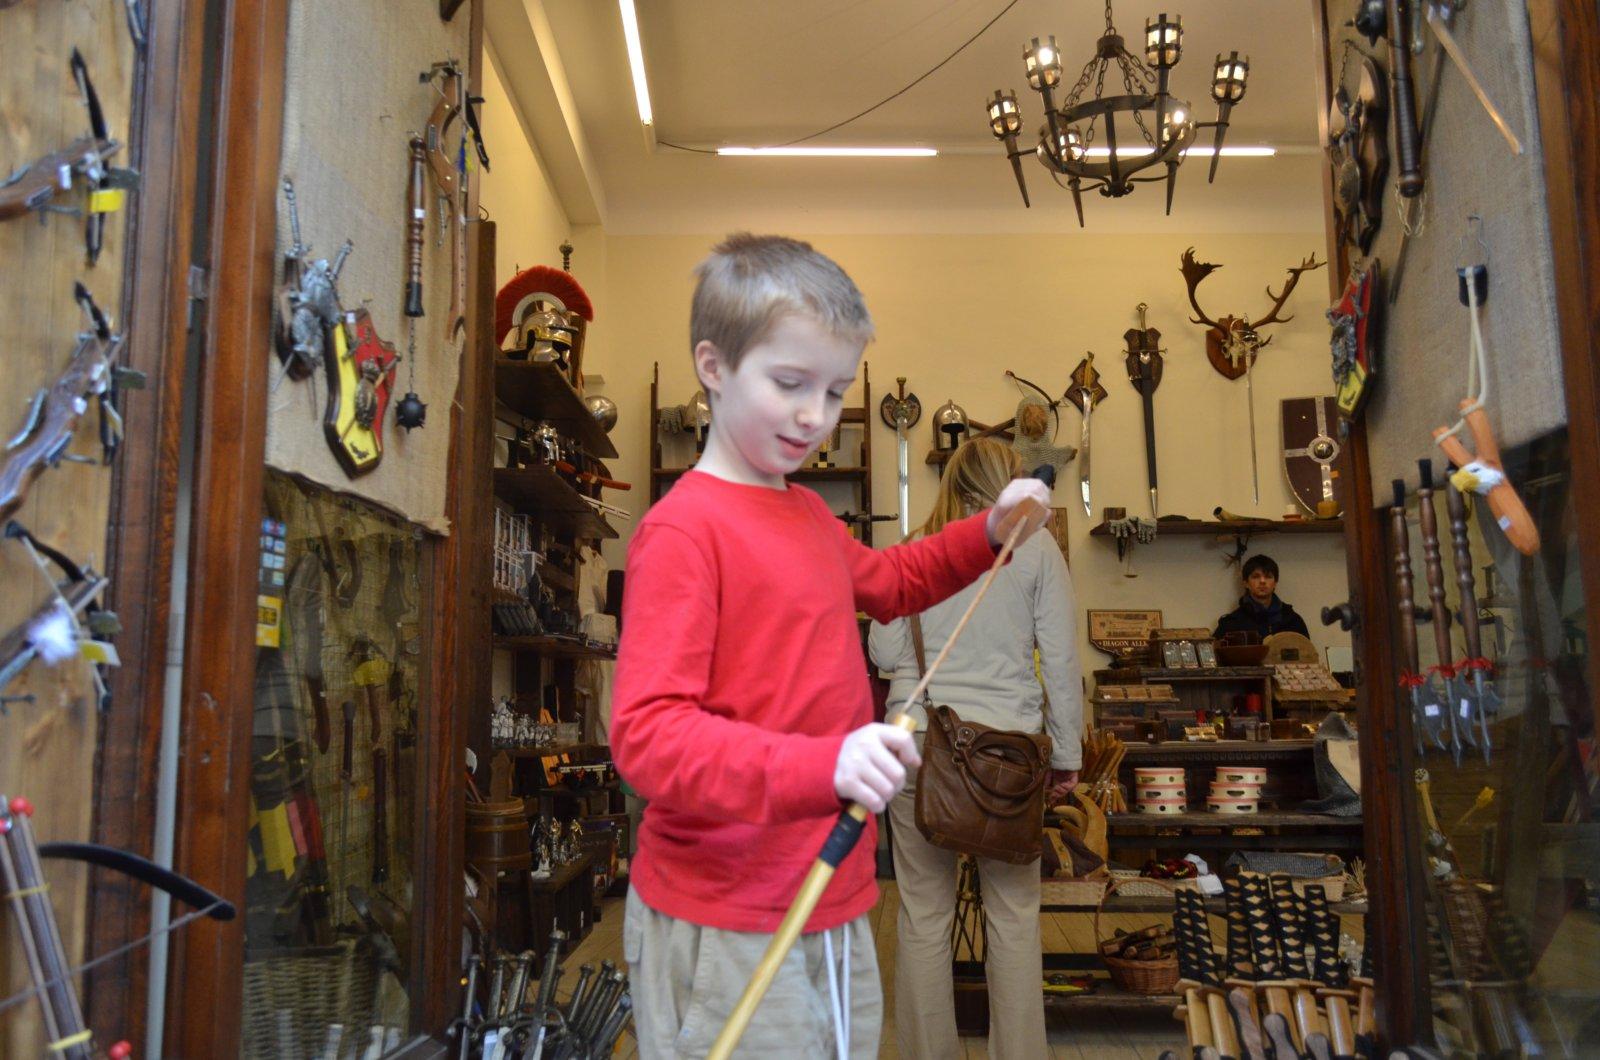 We learned our lesson about weapons in Ireland, but boy, Buster and Monkey were intrigued by this shop.